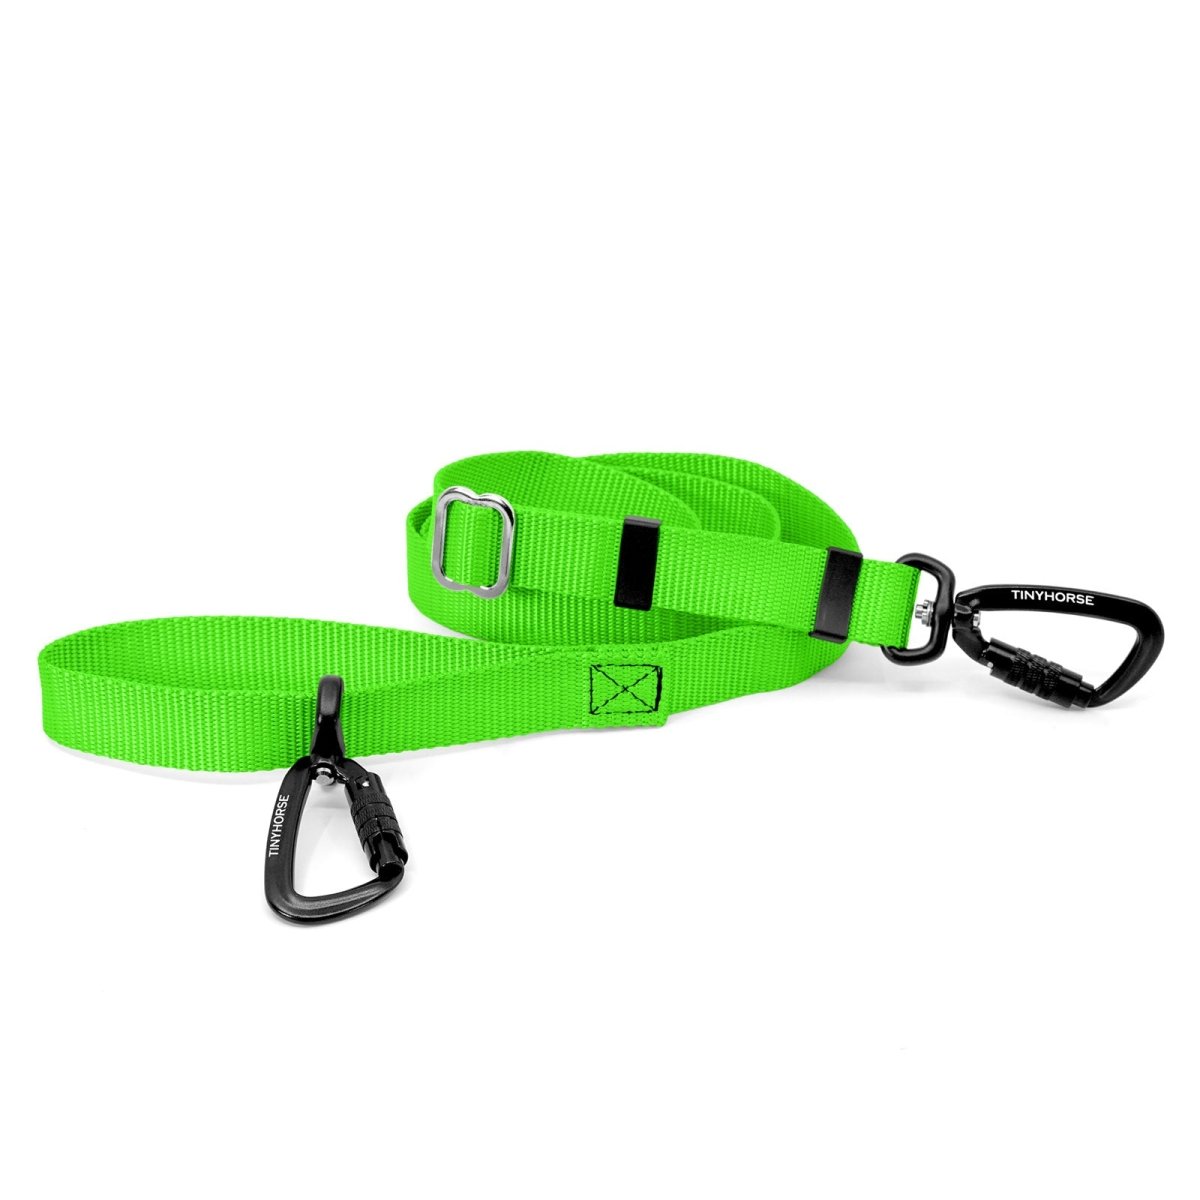 A neon green-coloured Lead-All Lite Extra with an adjustable nylon webbing leash and 2 auto-locking carabiners